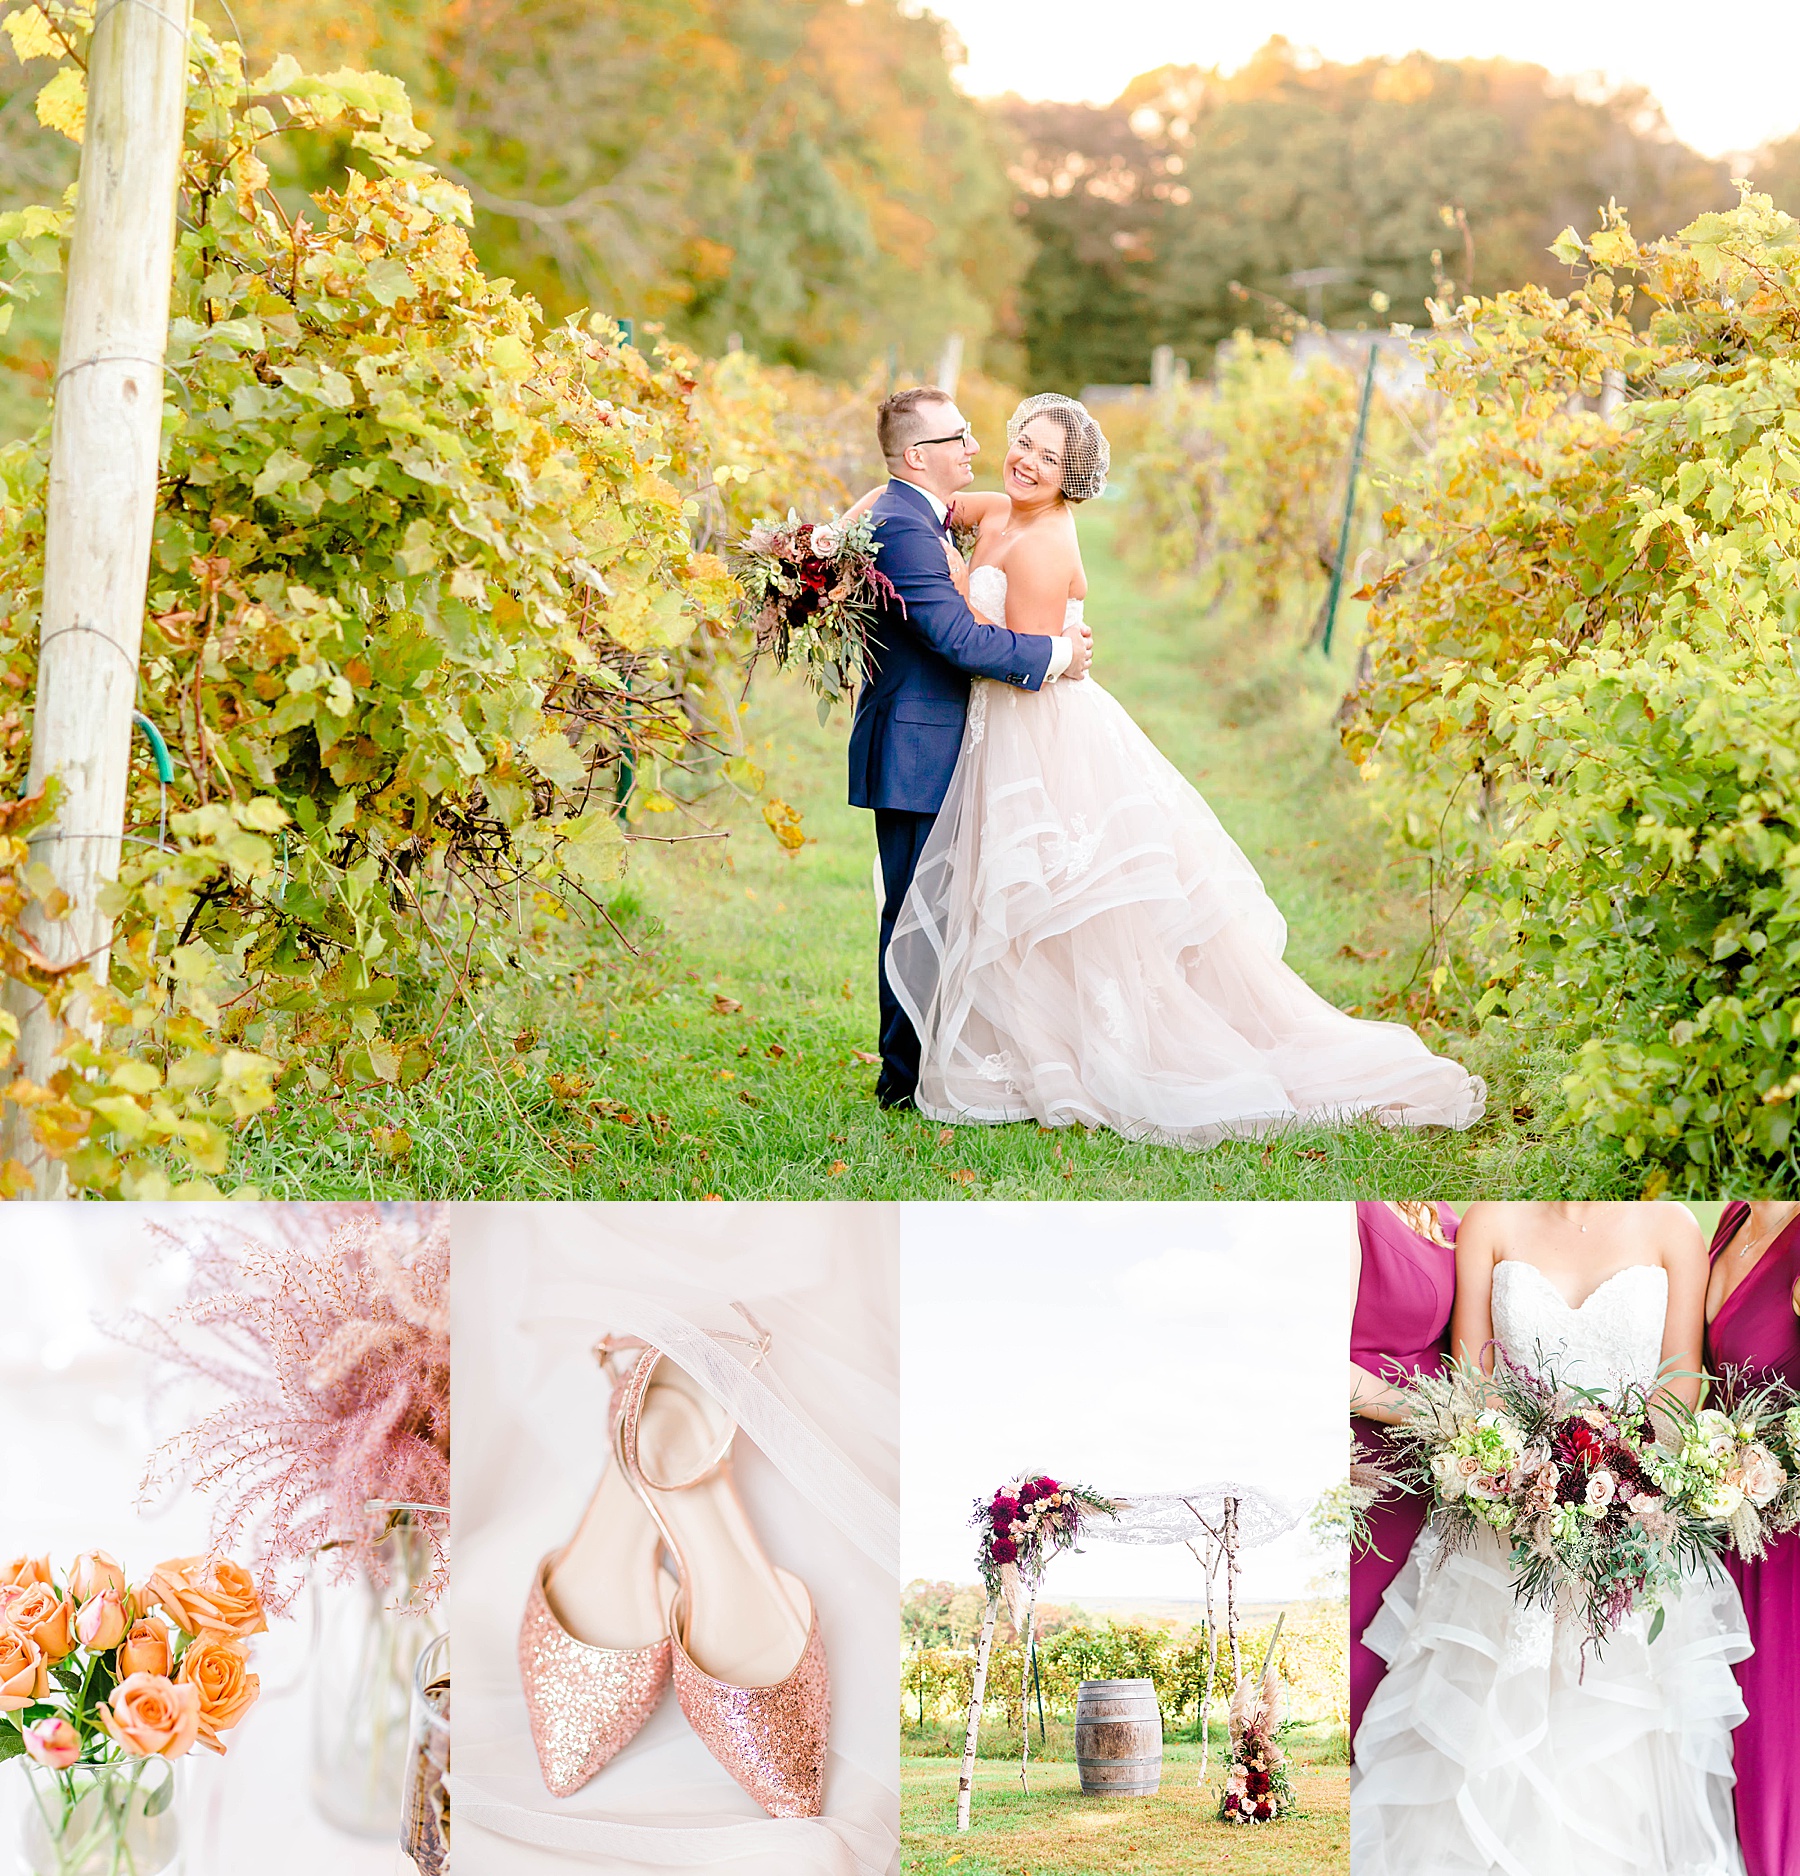 Alizah and Mike's fall wedding day at Priam Vineyards was so beautiful with such gorgeous details!